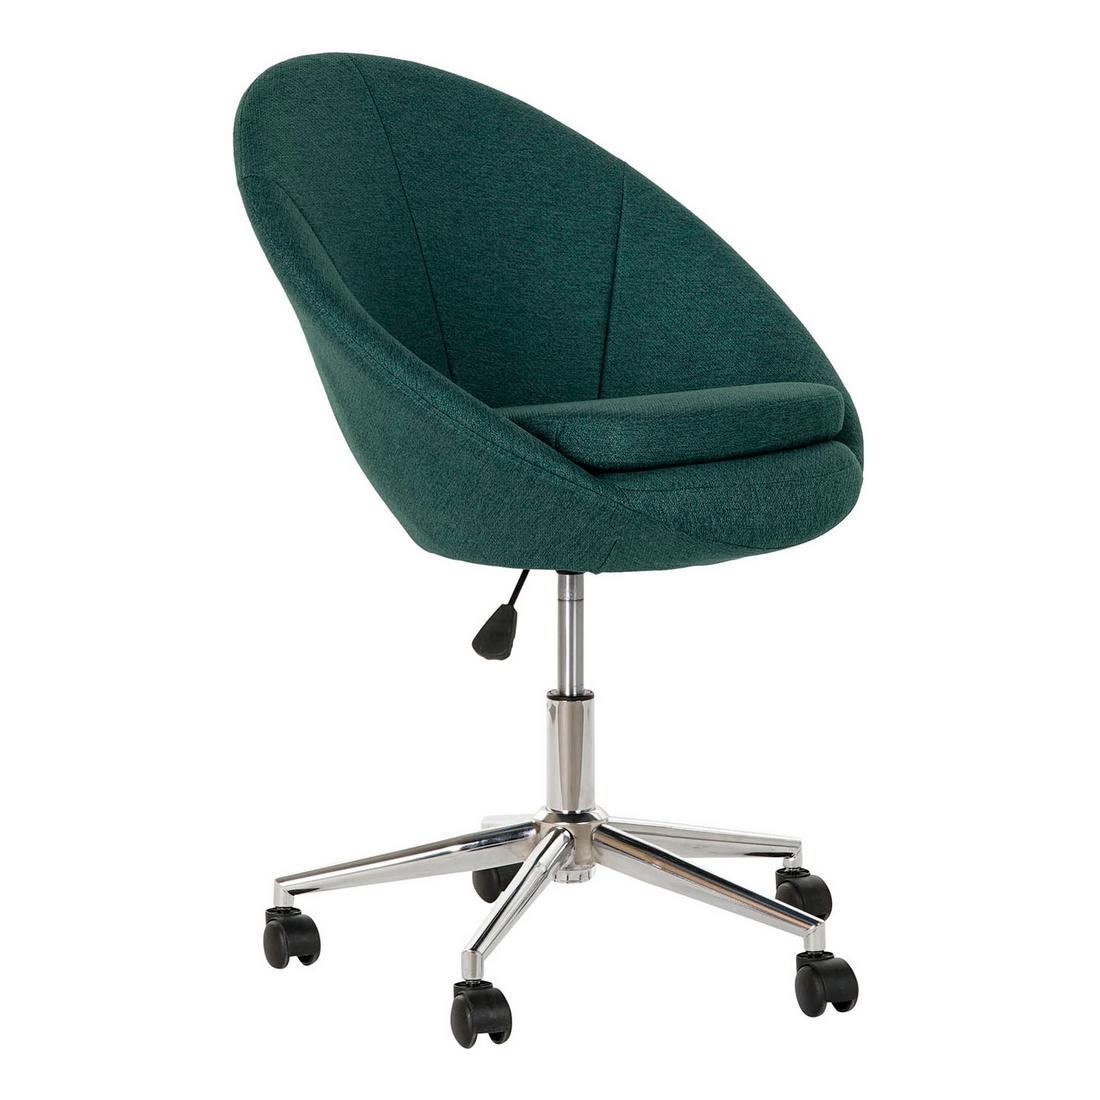 Contemporary office chair "ANSO"